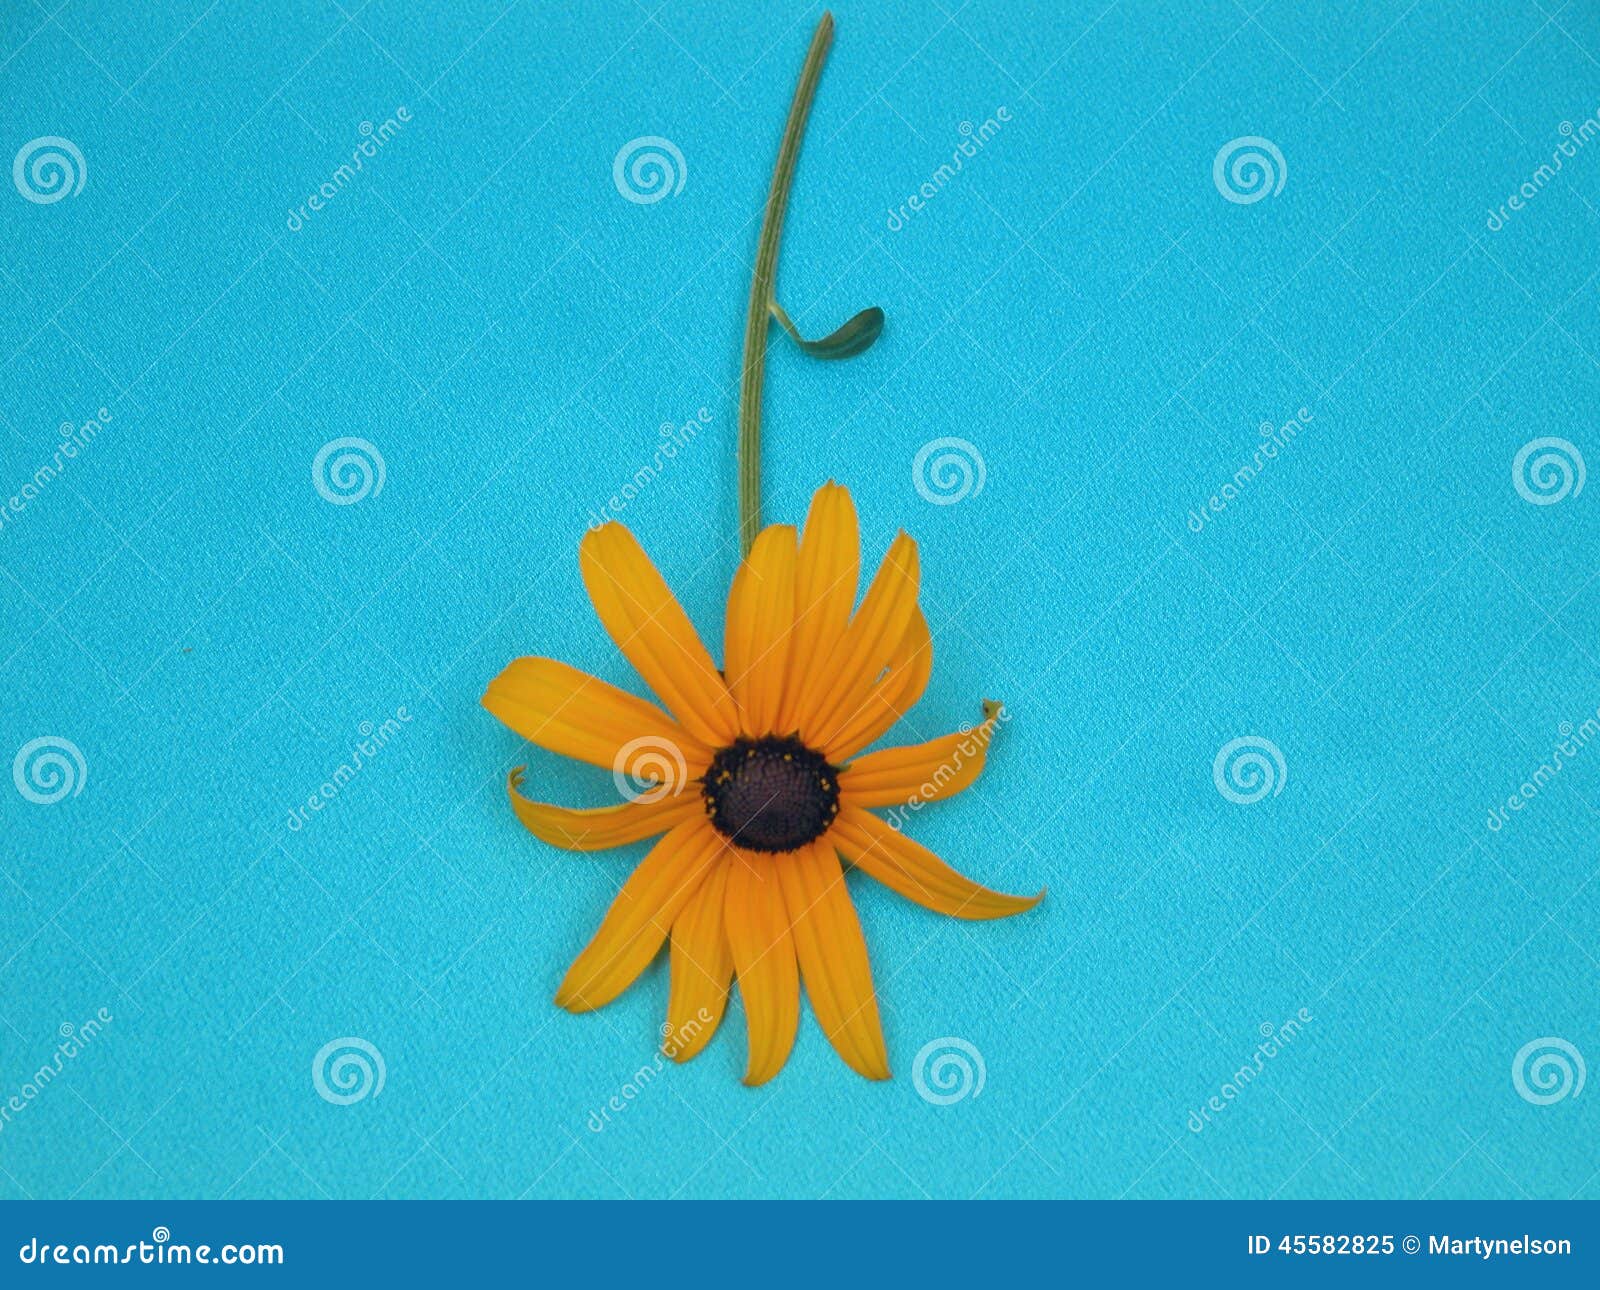 A Black-Eyed Susan (Rudbeckia) is displayed upon a turquoise background.